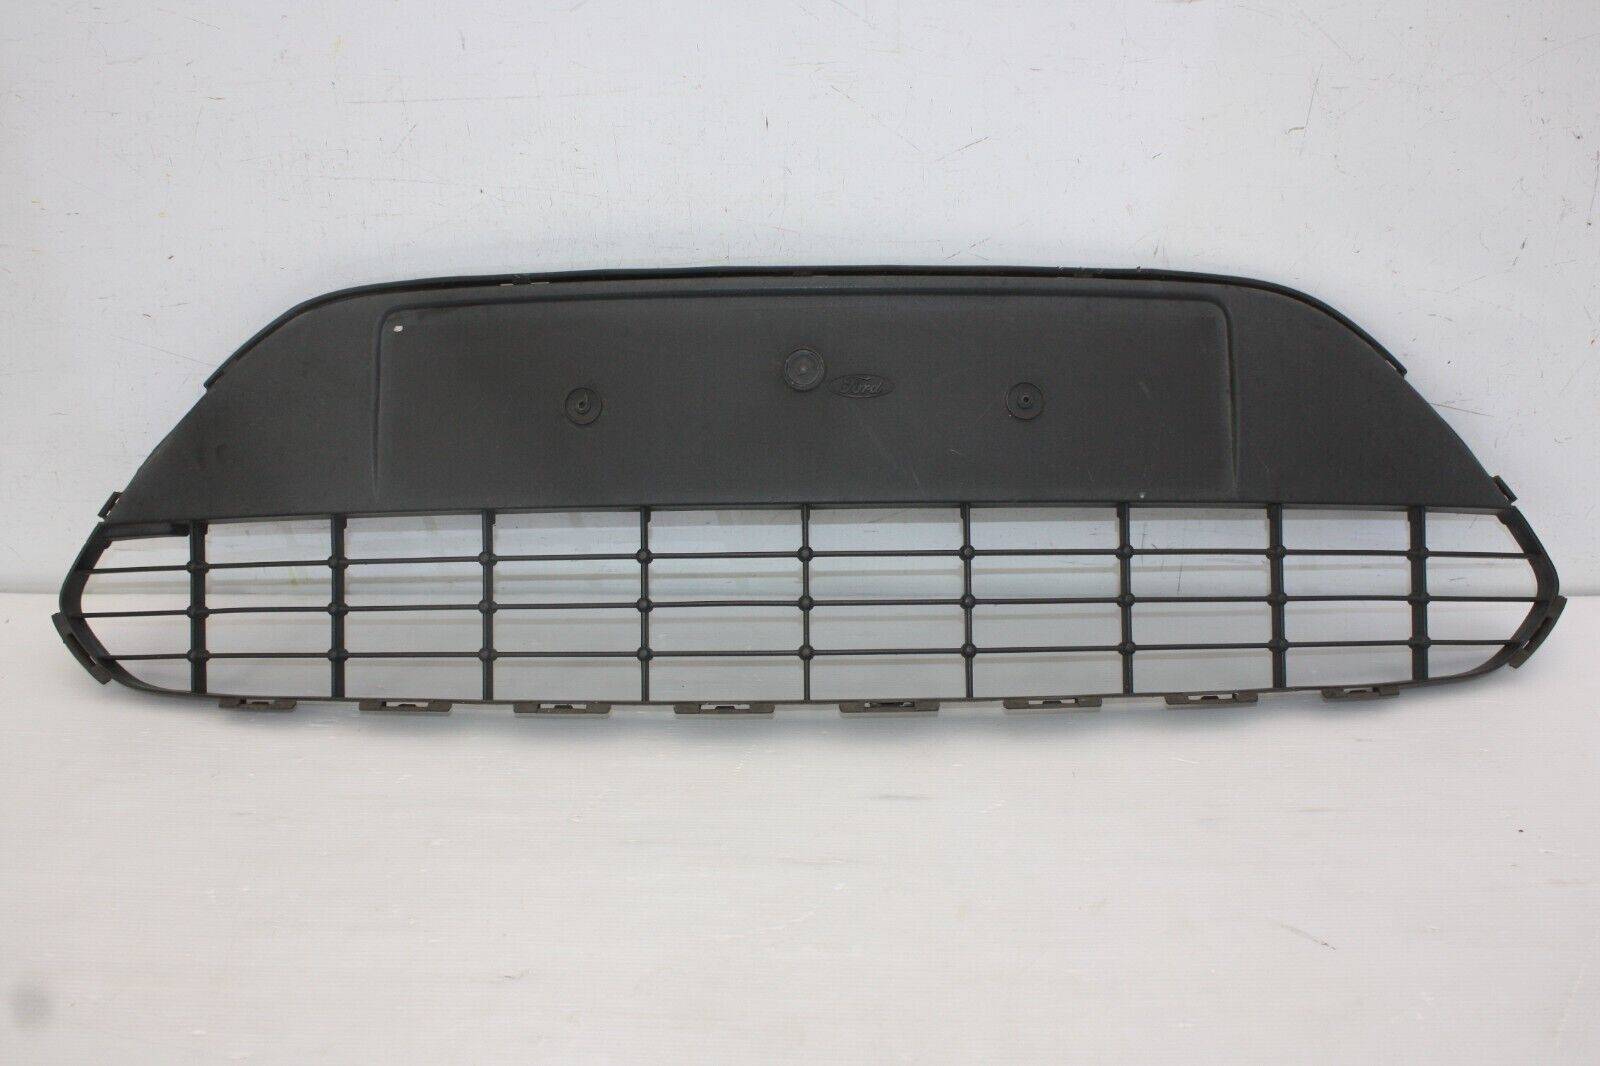 Ford Focus Front Bumper Grill 2008 TO 2011 8M51 17B968 BE Genuine SEE PICS 175622452576